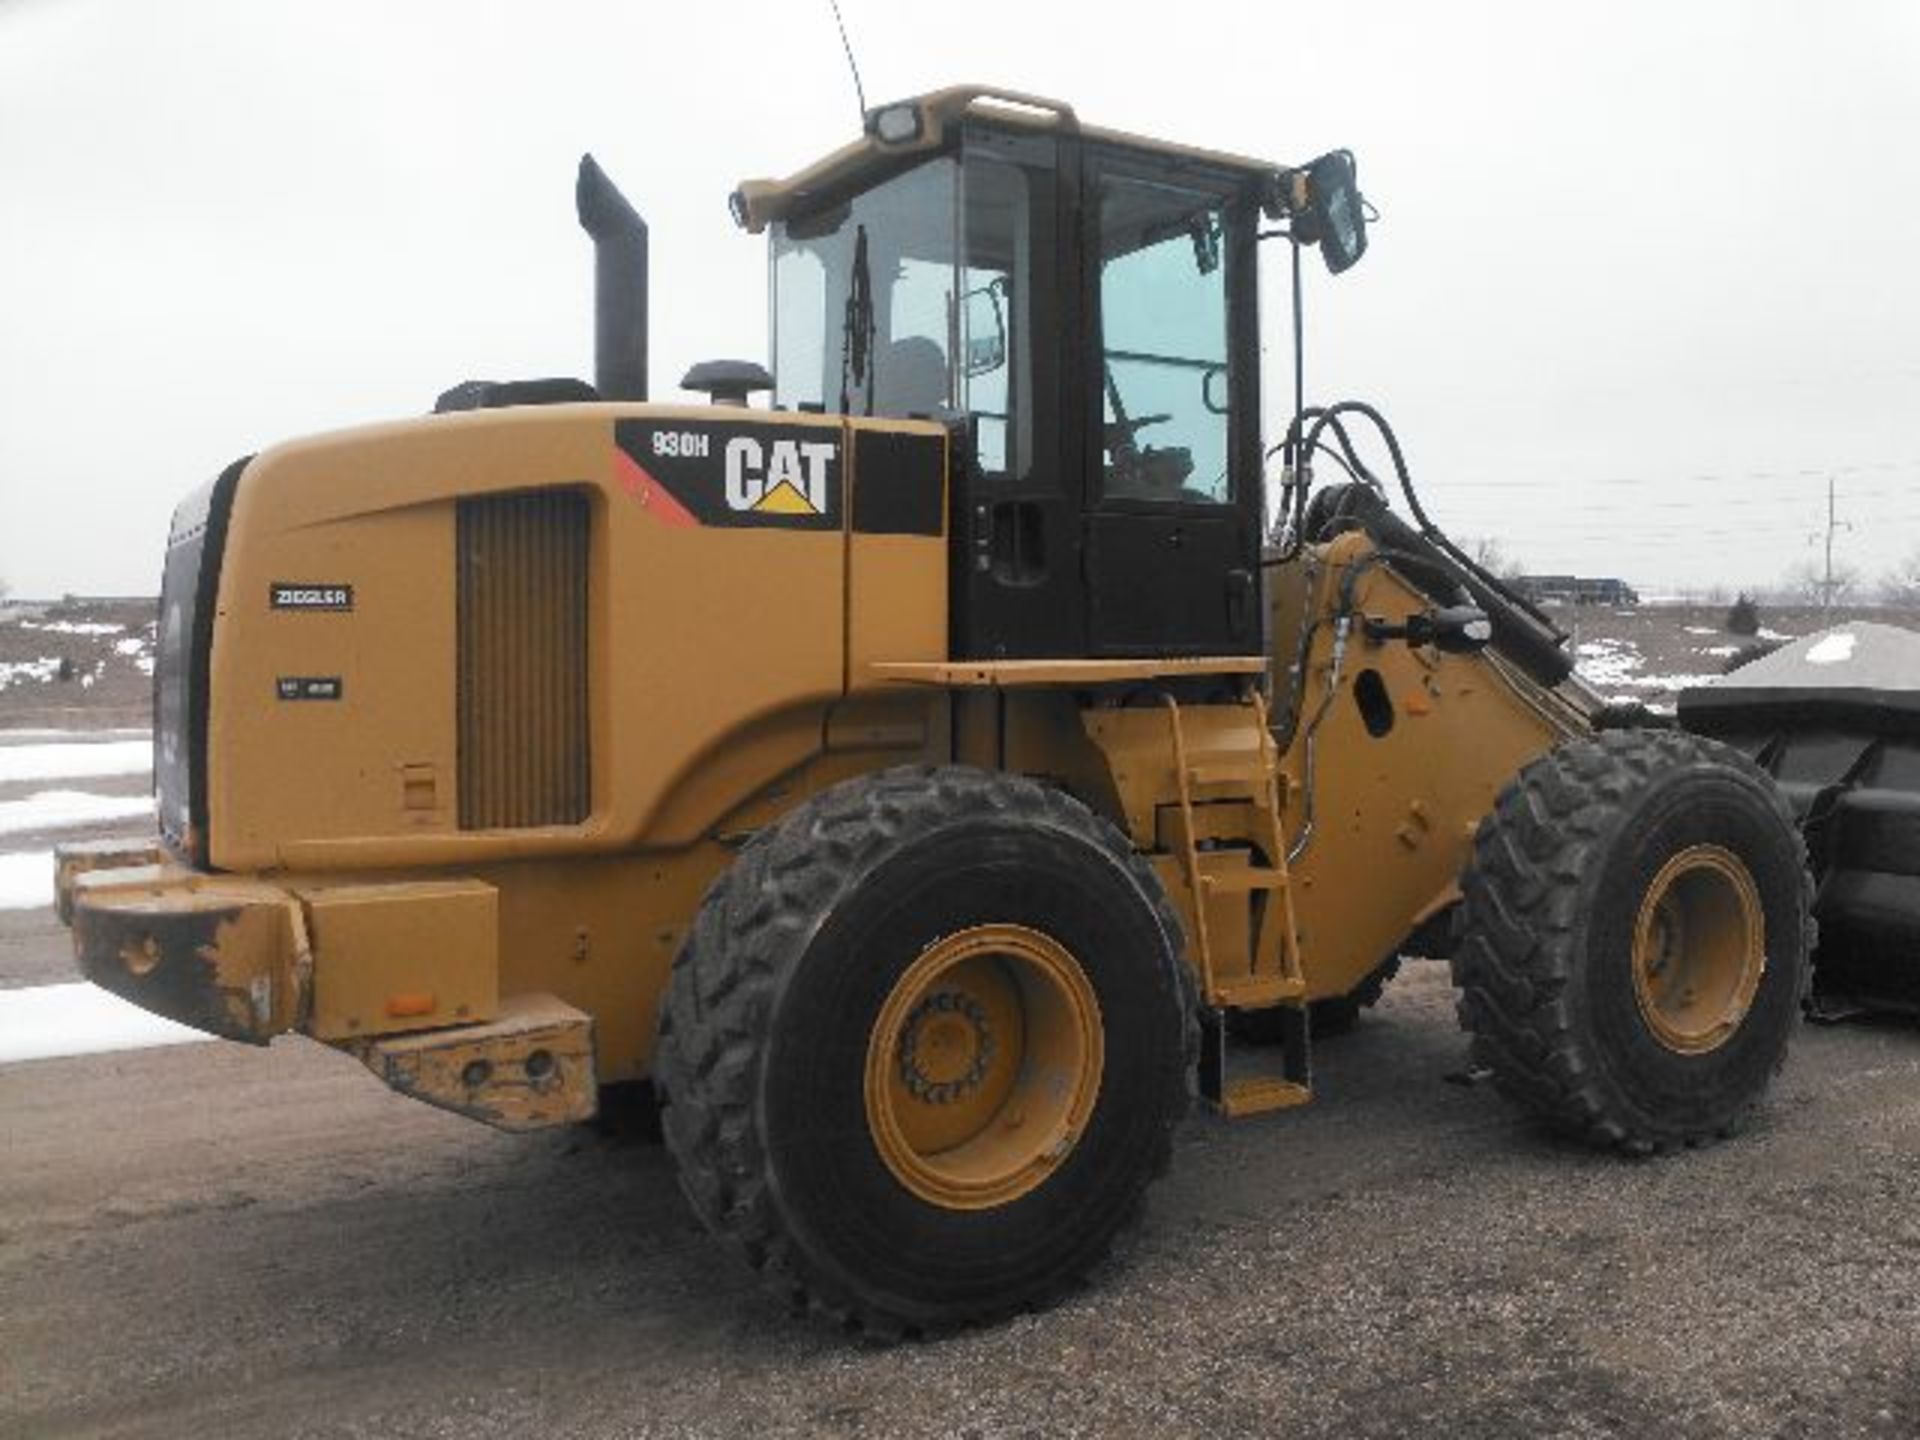 2008 Caterpillar 930H S/N CAT0930HHDHC00280, high lift,  ride control, 8,450 hrs. on meter, 9.300 - Image 7 of 14